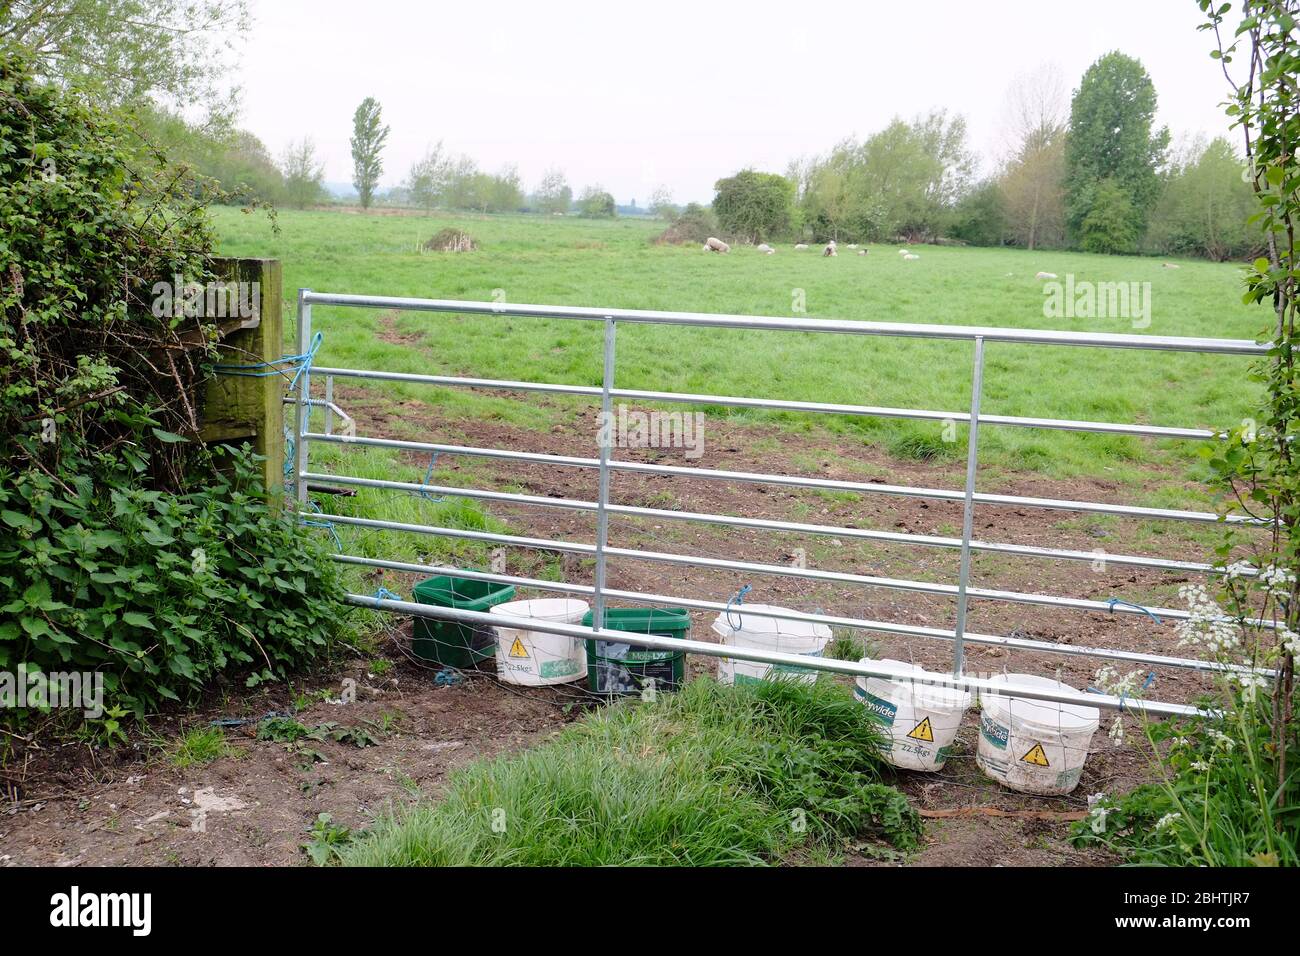 April 2020 - Buckets of water left beside a gate by the farmers so there is fresh water for the livestock to drink Stock Photo